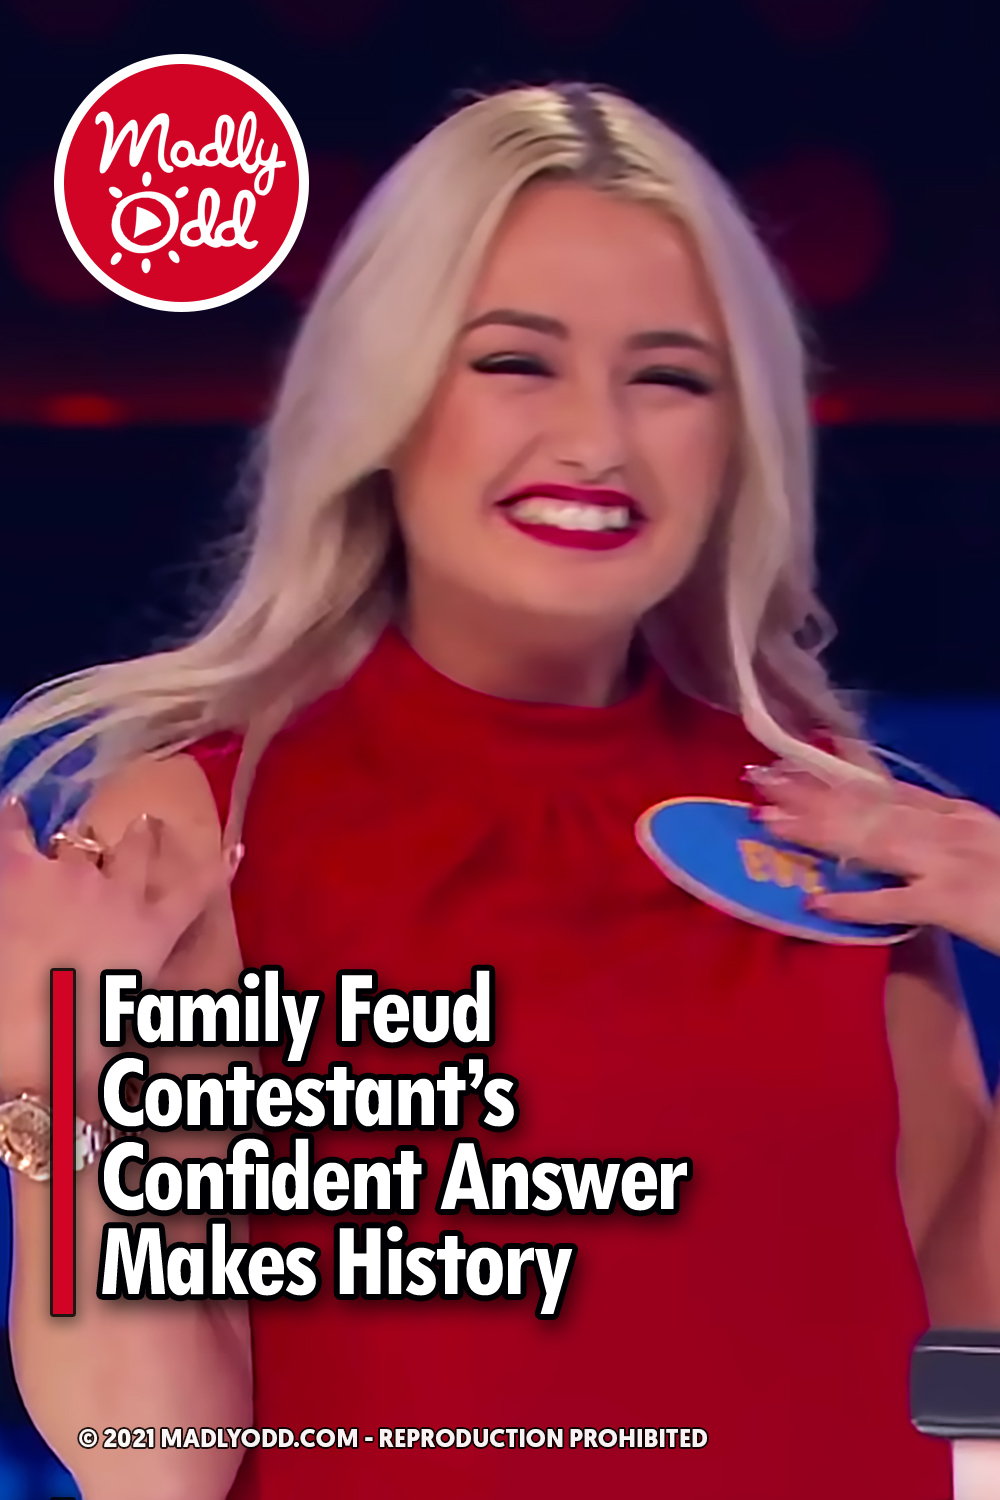 Family Feud Contestant’s Confident Answer Makes History